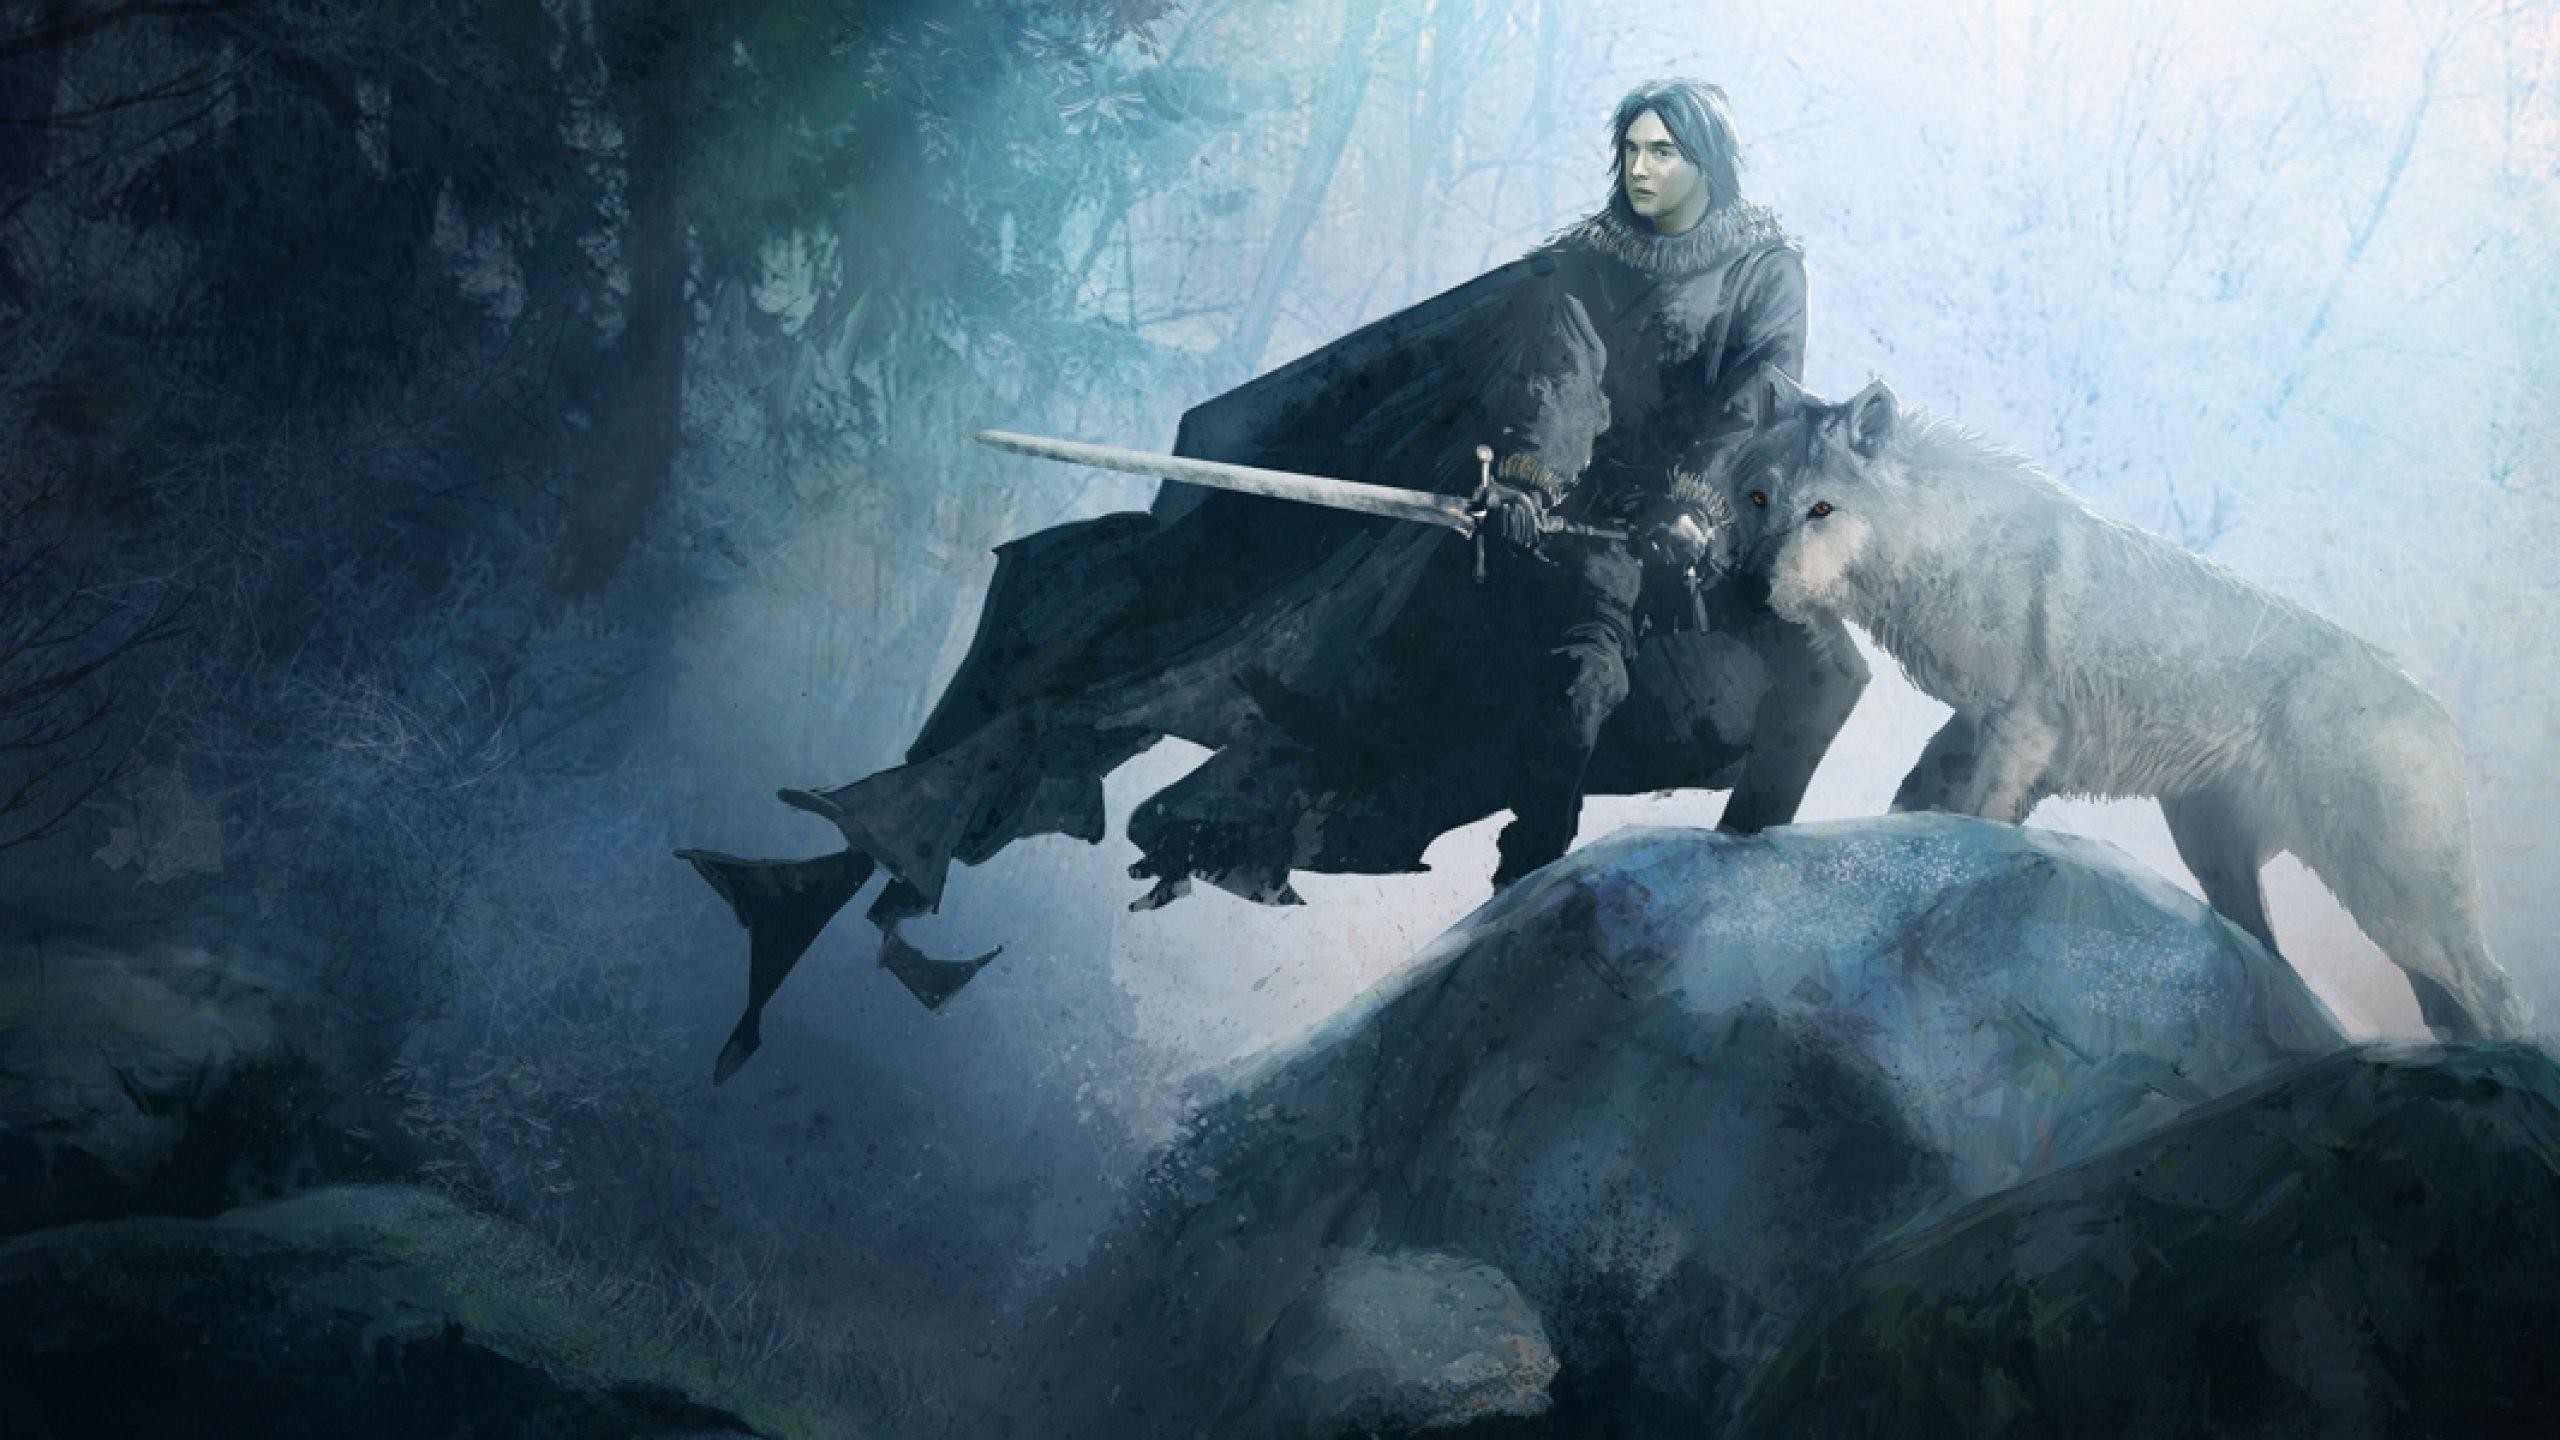 2560x1440 Game of Thrones Jon Snow - Wallpaper, High Definition, High Quality .